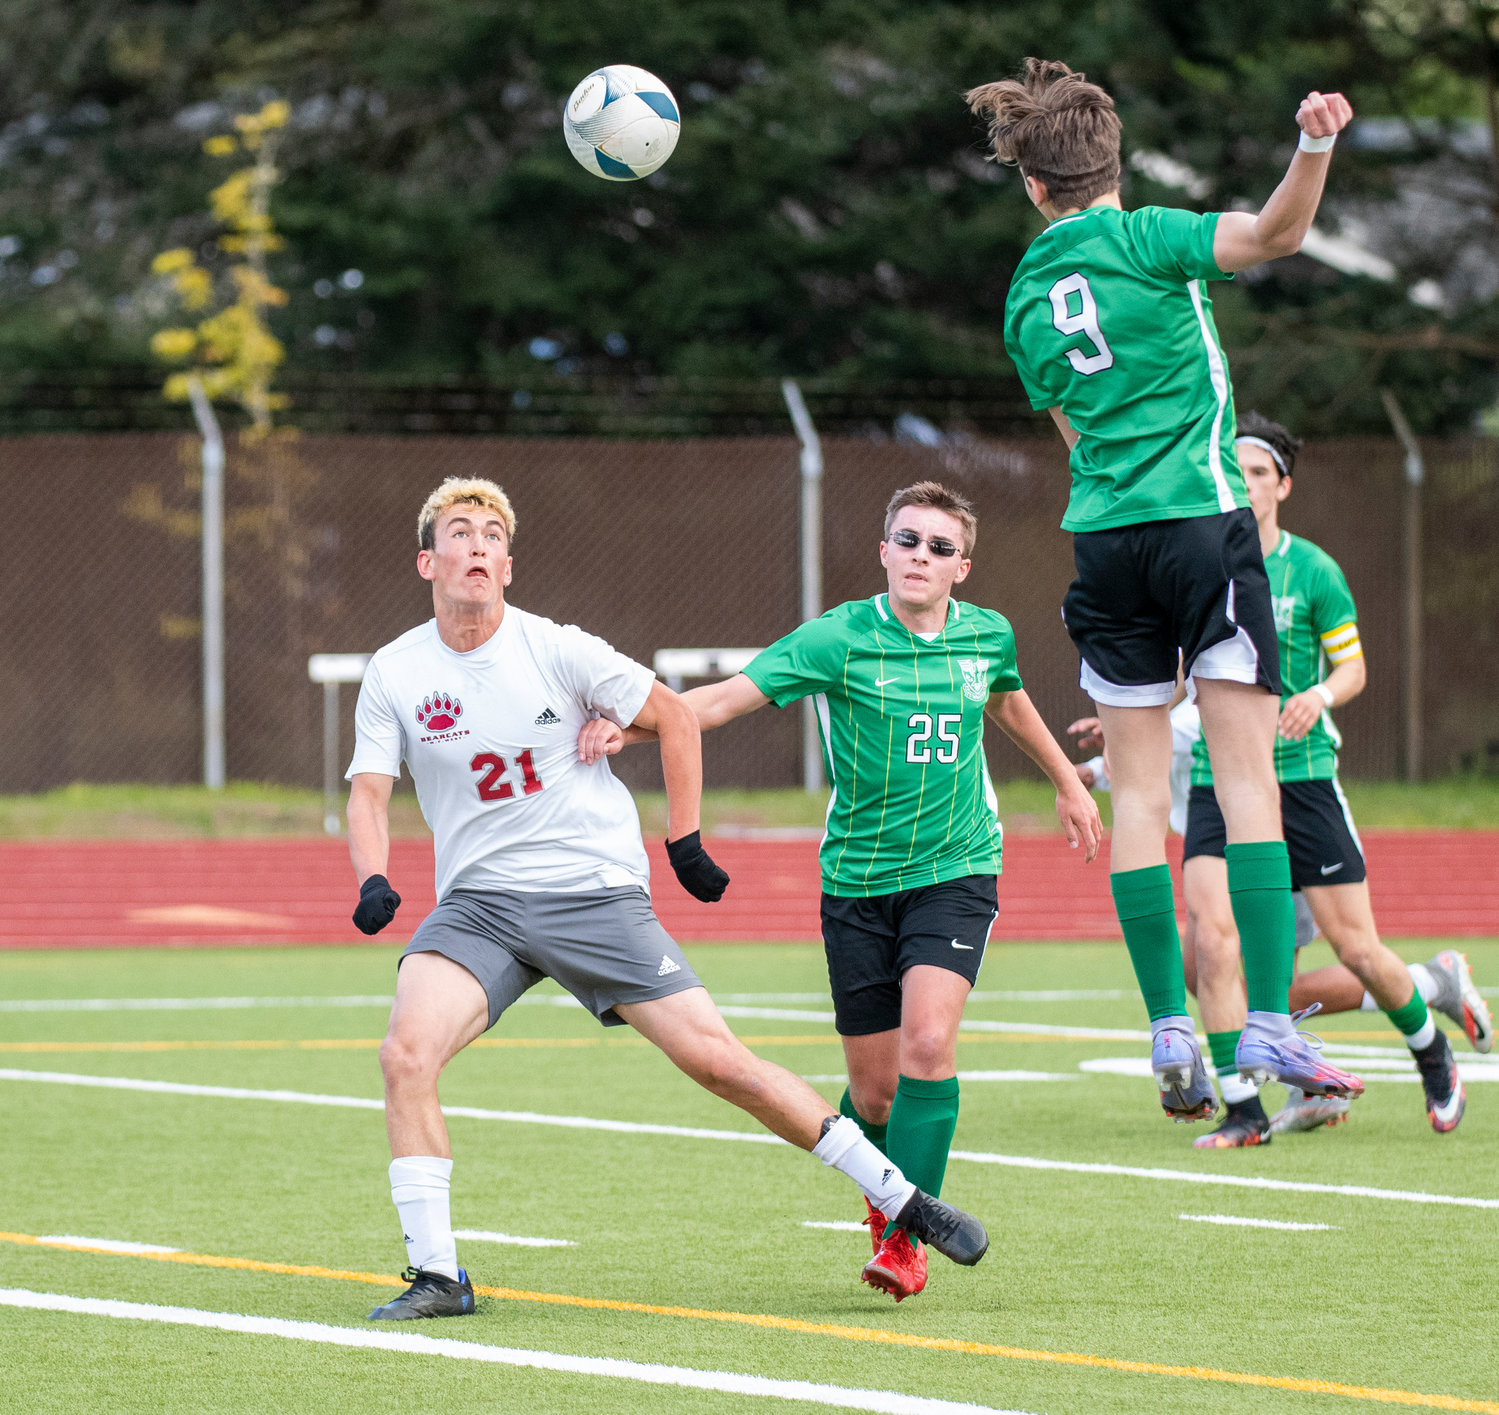 W.F. West's Gideon Priest (21) looks for a cross against Tumwater during the district semifinals on May 12.